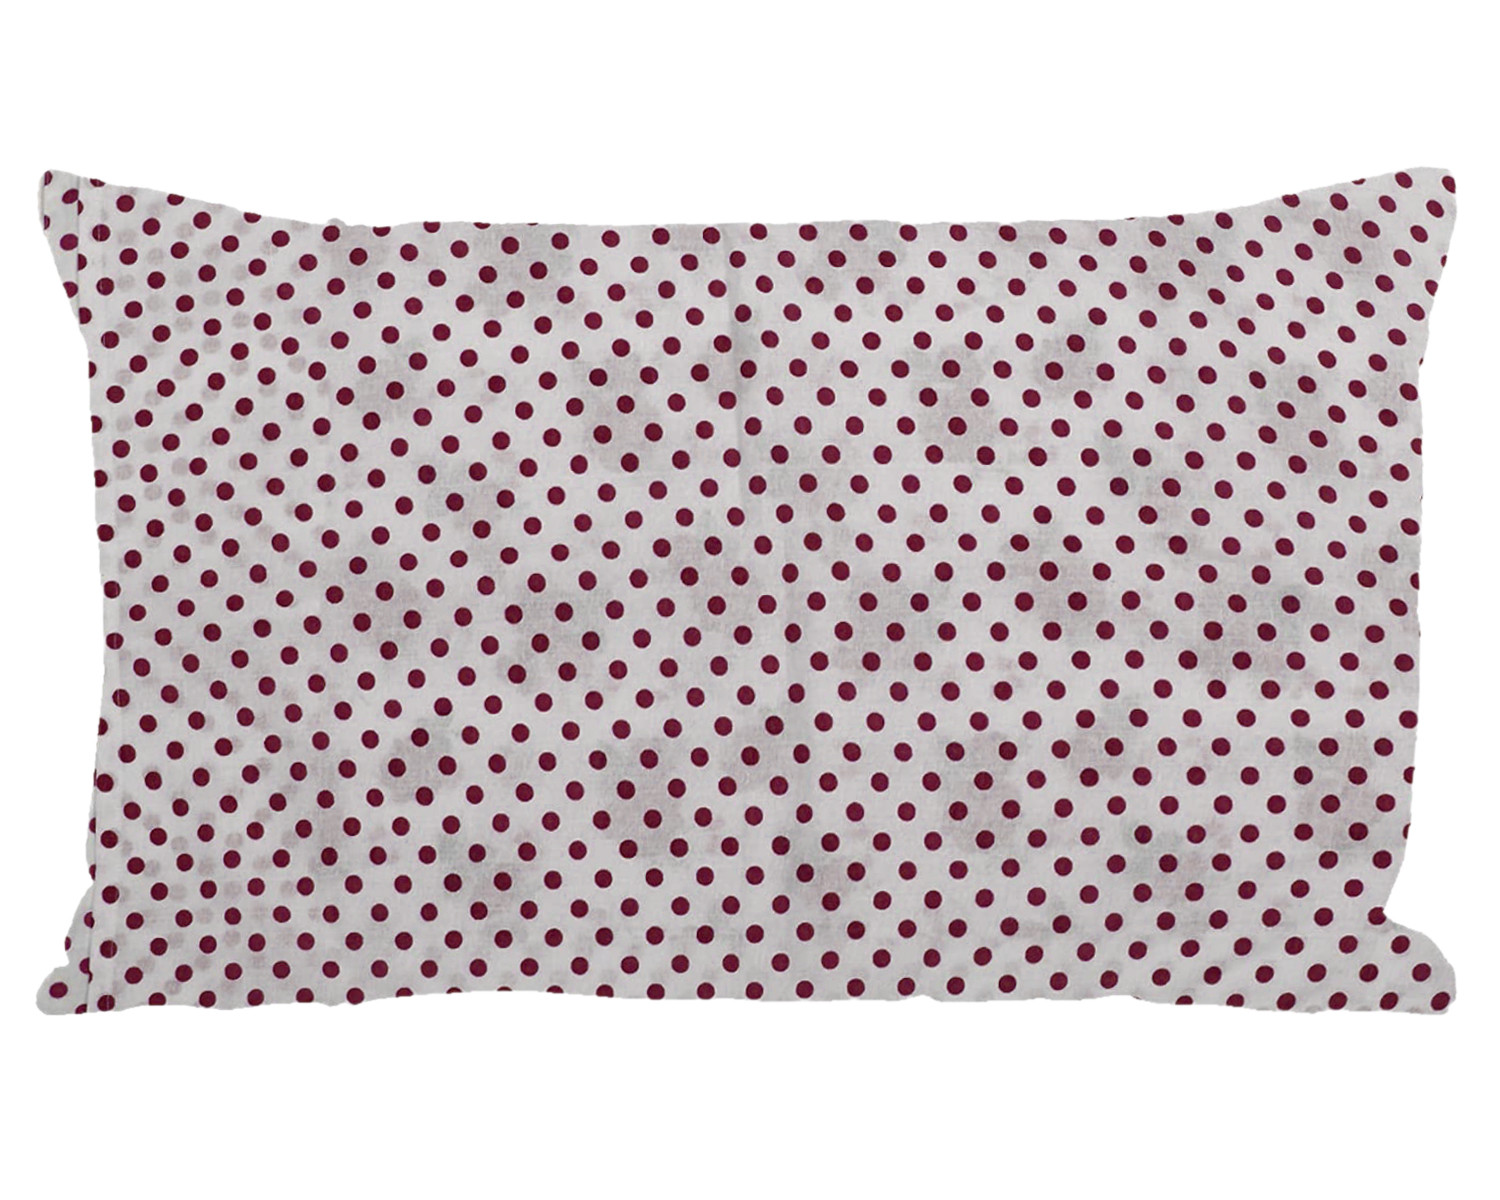 Kuber Industries Dot Print Cotton Pillow Cover- 17x27 Inch,(Pink)